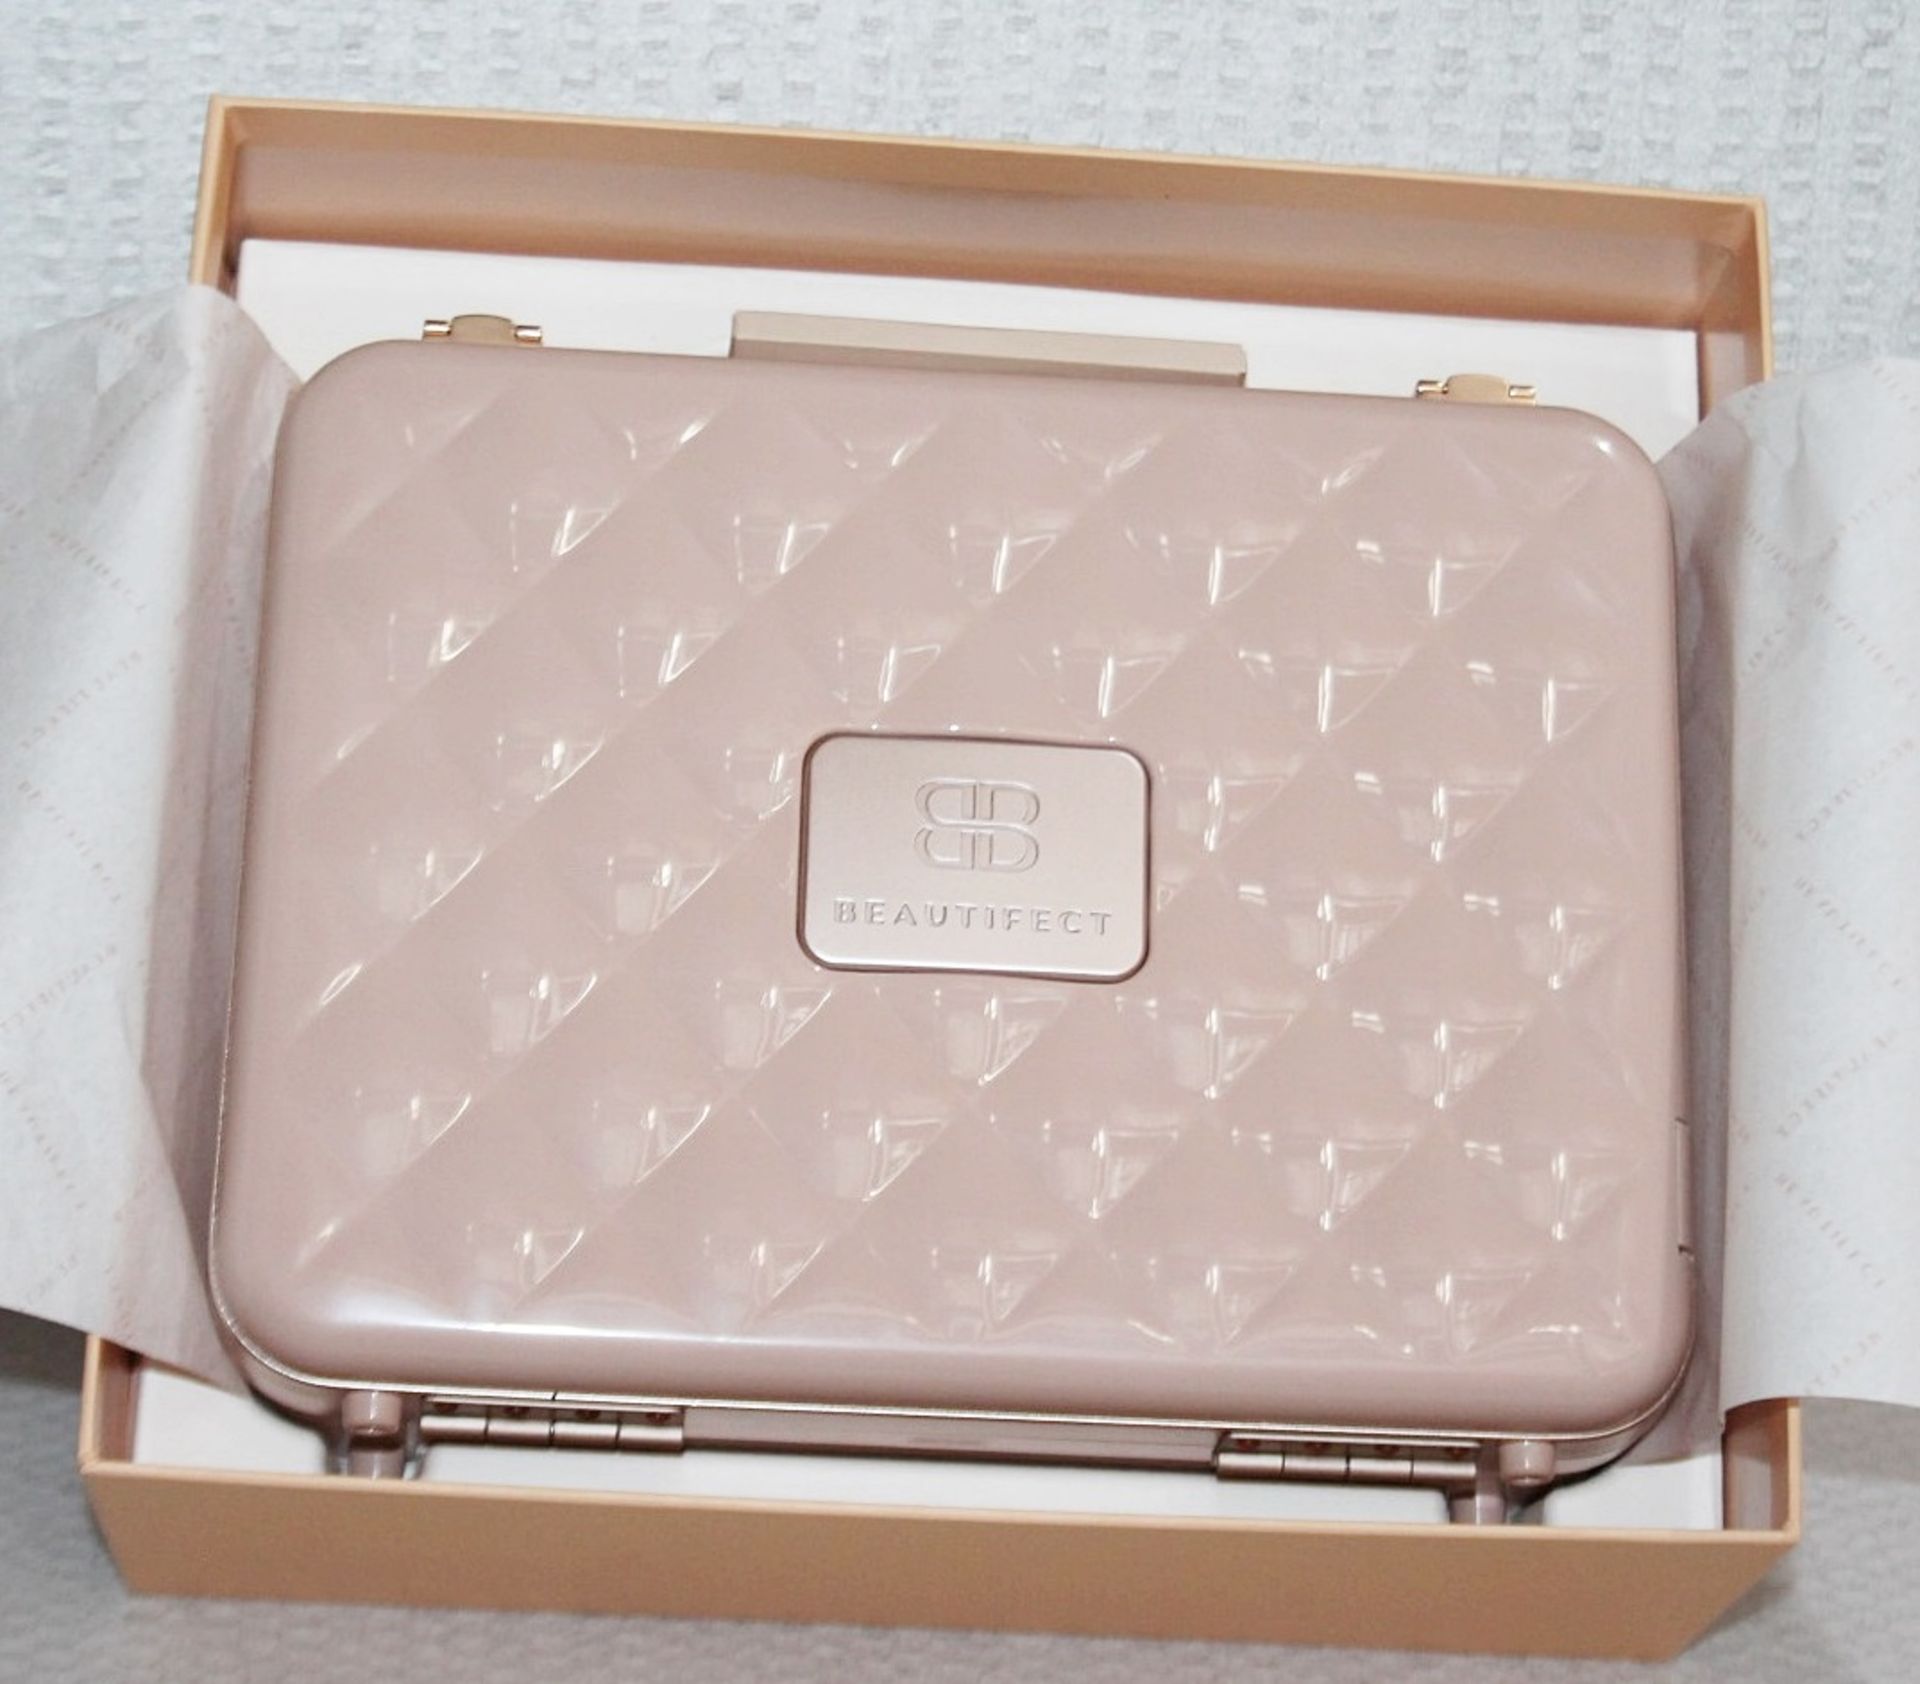 1 x BEAUTIFECT 'Beautifect Box' Make-Up Carry Case With Built-in Illuminated Mirror - RRP £279.00 - Image 2 of 11